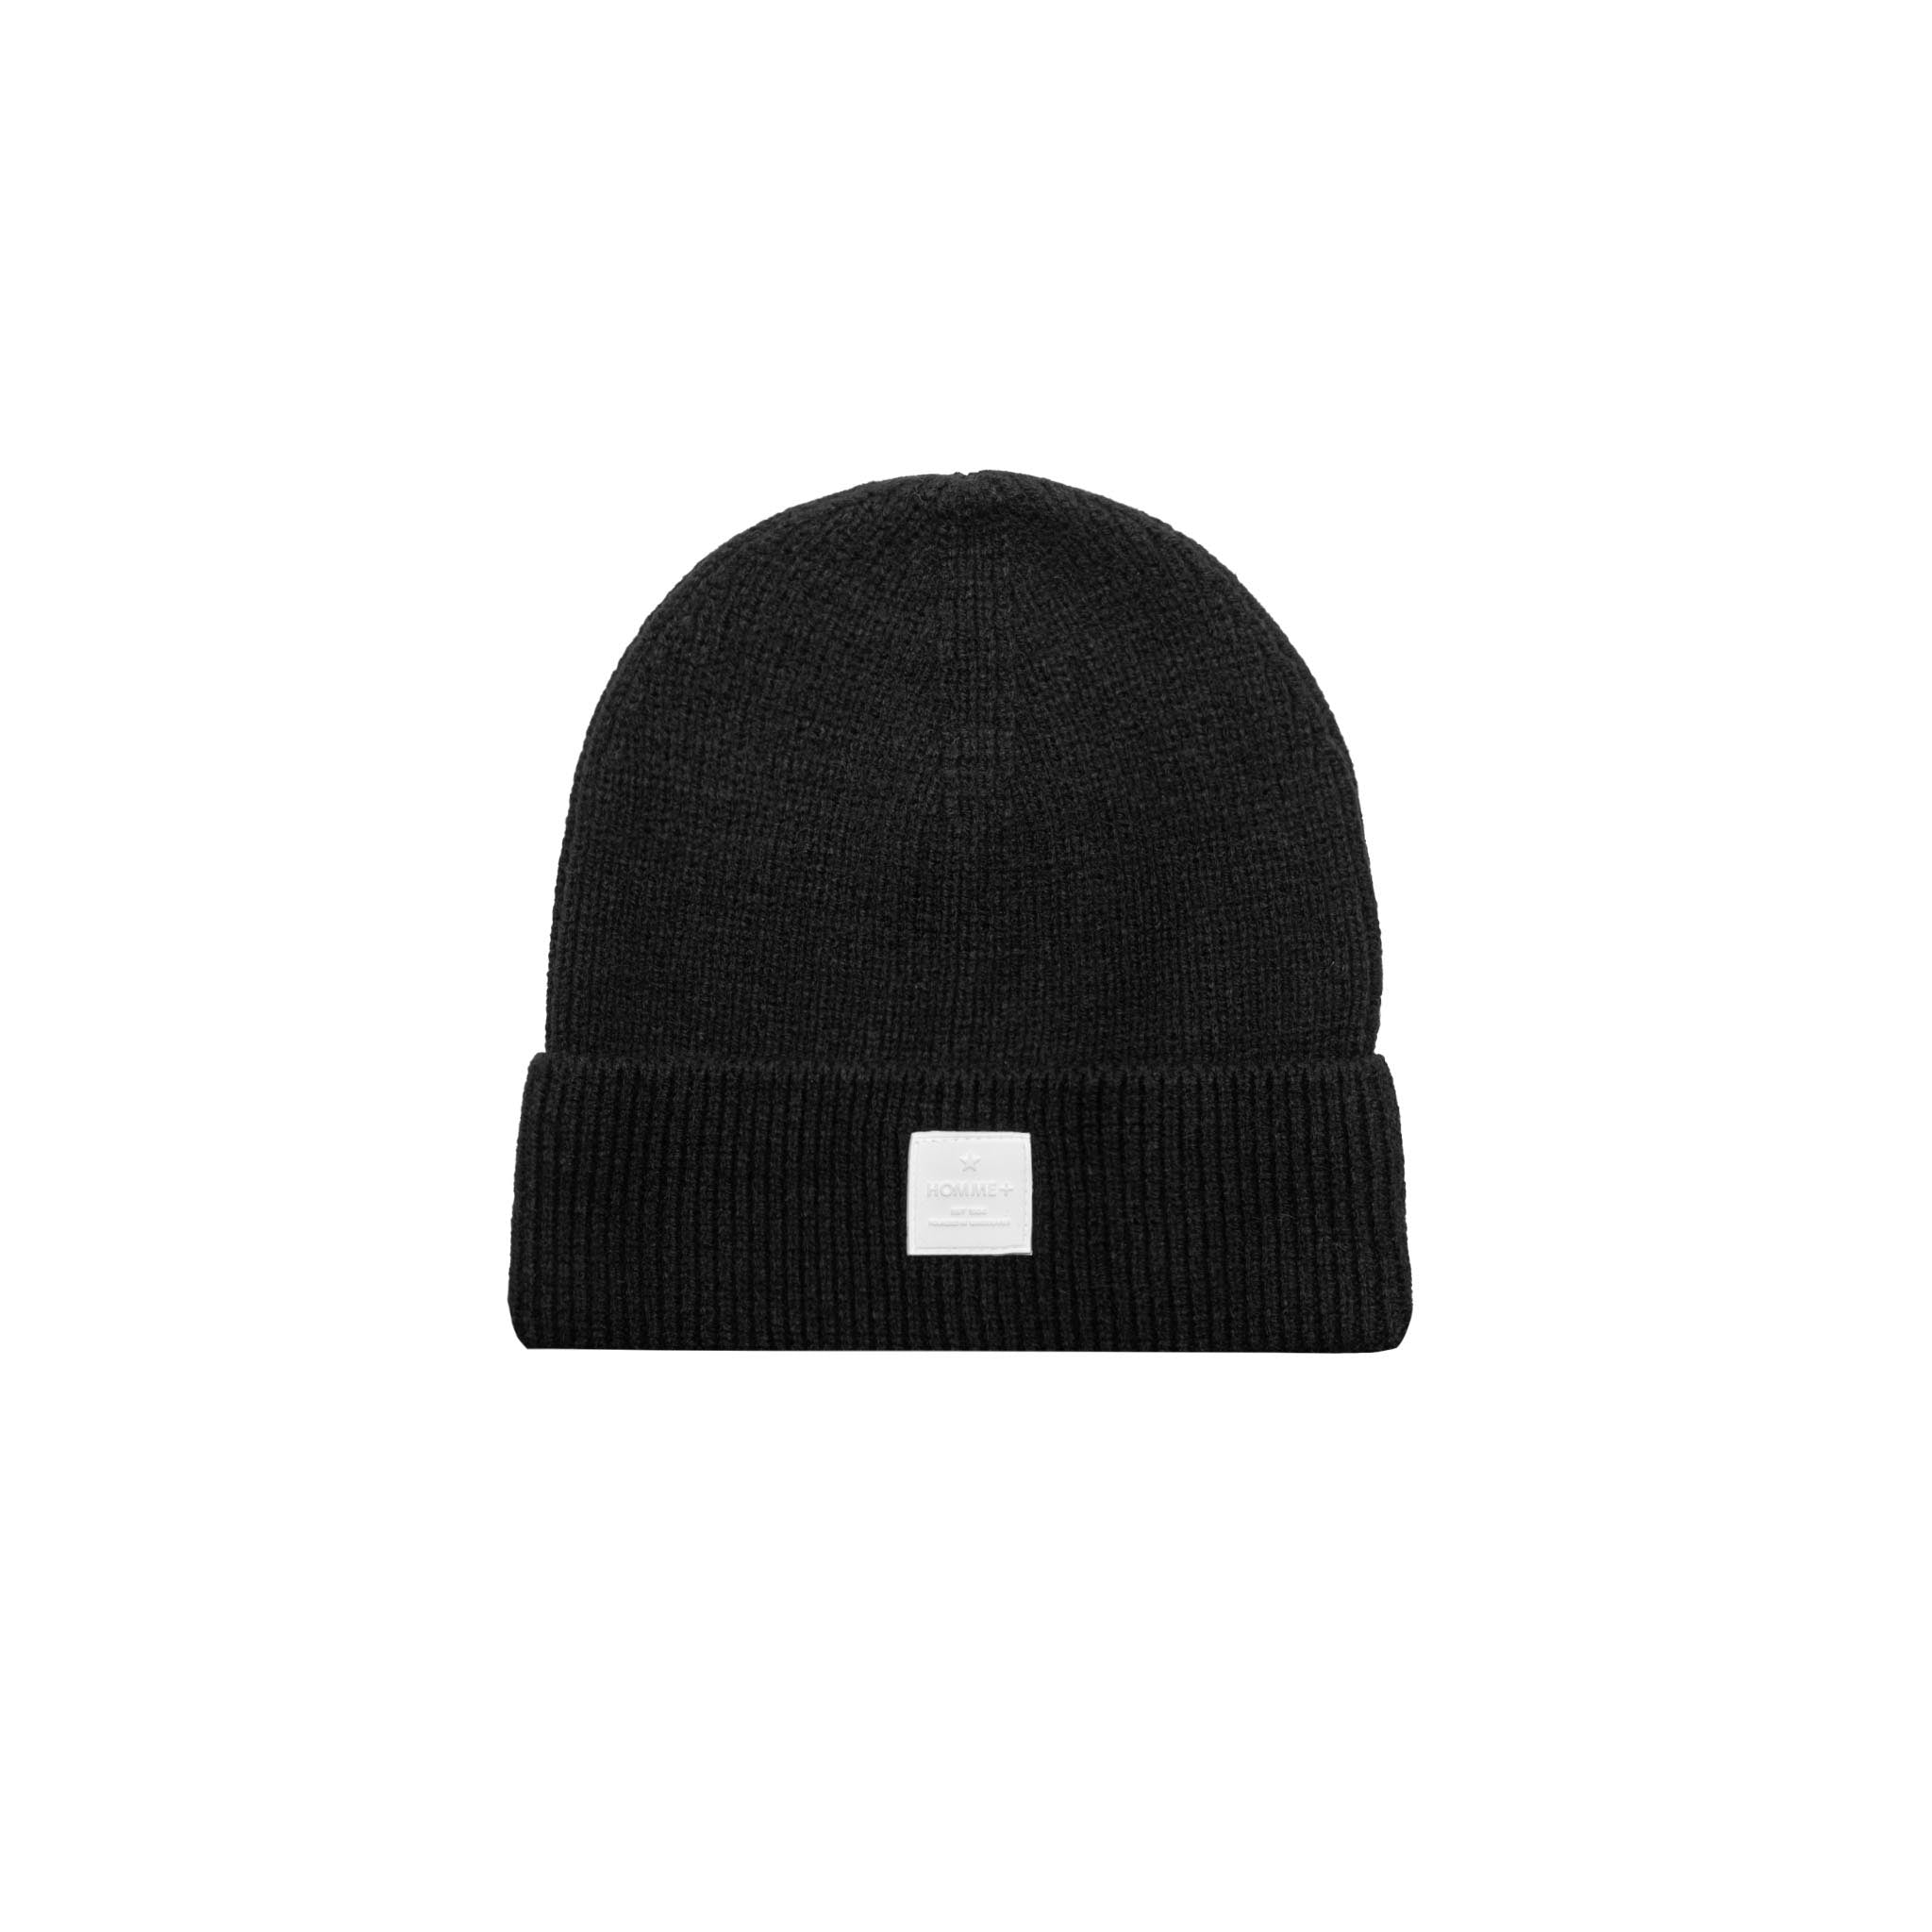 HOMME+ Rubber Patch Beanie Black/White